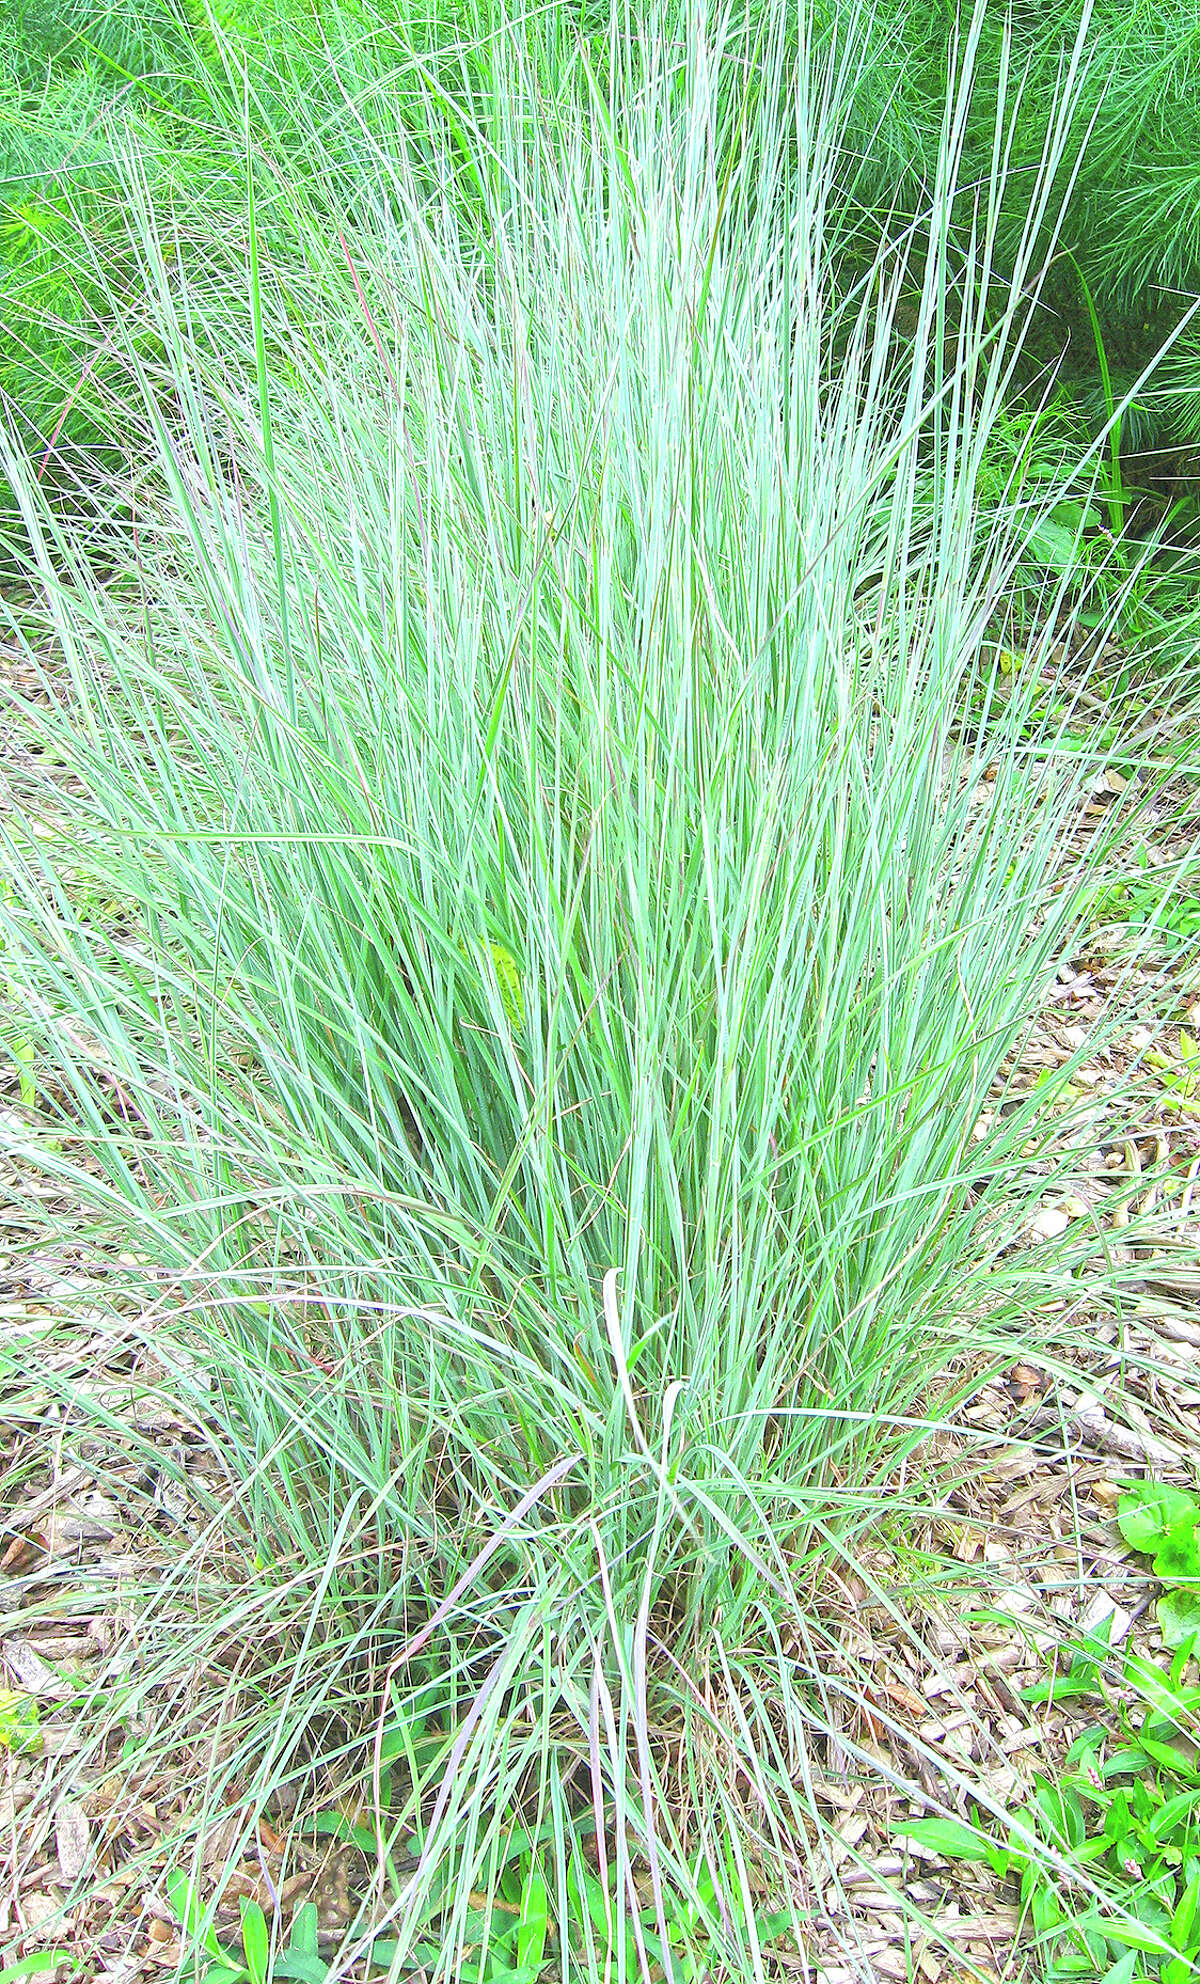 Each state has its own unique preference for native plants. Garden for Wildlife has uncovered the top pick in Illinois: Schizachyrium scoparium, aka little bluestem or beard grass. Little bluestem grasses provides a focal point of blue-green color and texture spring through late summer, offering shelter for birds and other wildlife. In fall, it turns a deep reddish brown, followed by white reflective seed tufts that last throughout winter. It grows 1.5 to 4 inches tall and blooms from June to December. It requires dry to medium moisture and can be planted in sandy, loan, clay or limestone soil. It is deer-resistant and attracts butterfly and moth caterpillars, birds and fireflies.